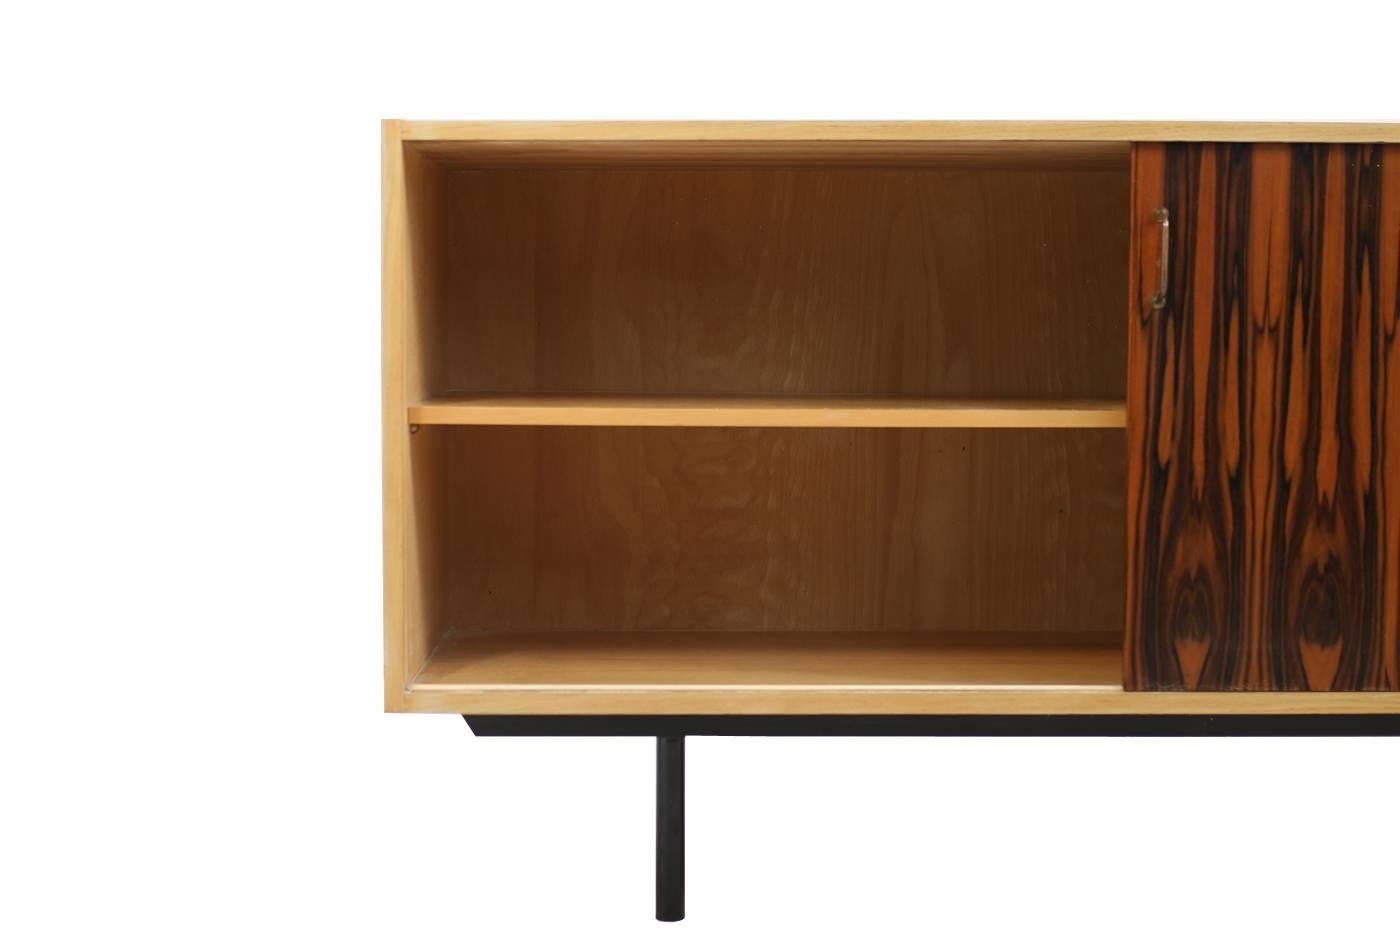 German 1950s Oak Sideboard Mid-Century Modern Design with Drawers Brass Handles For Sale